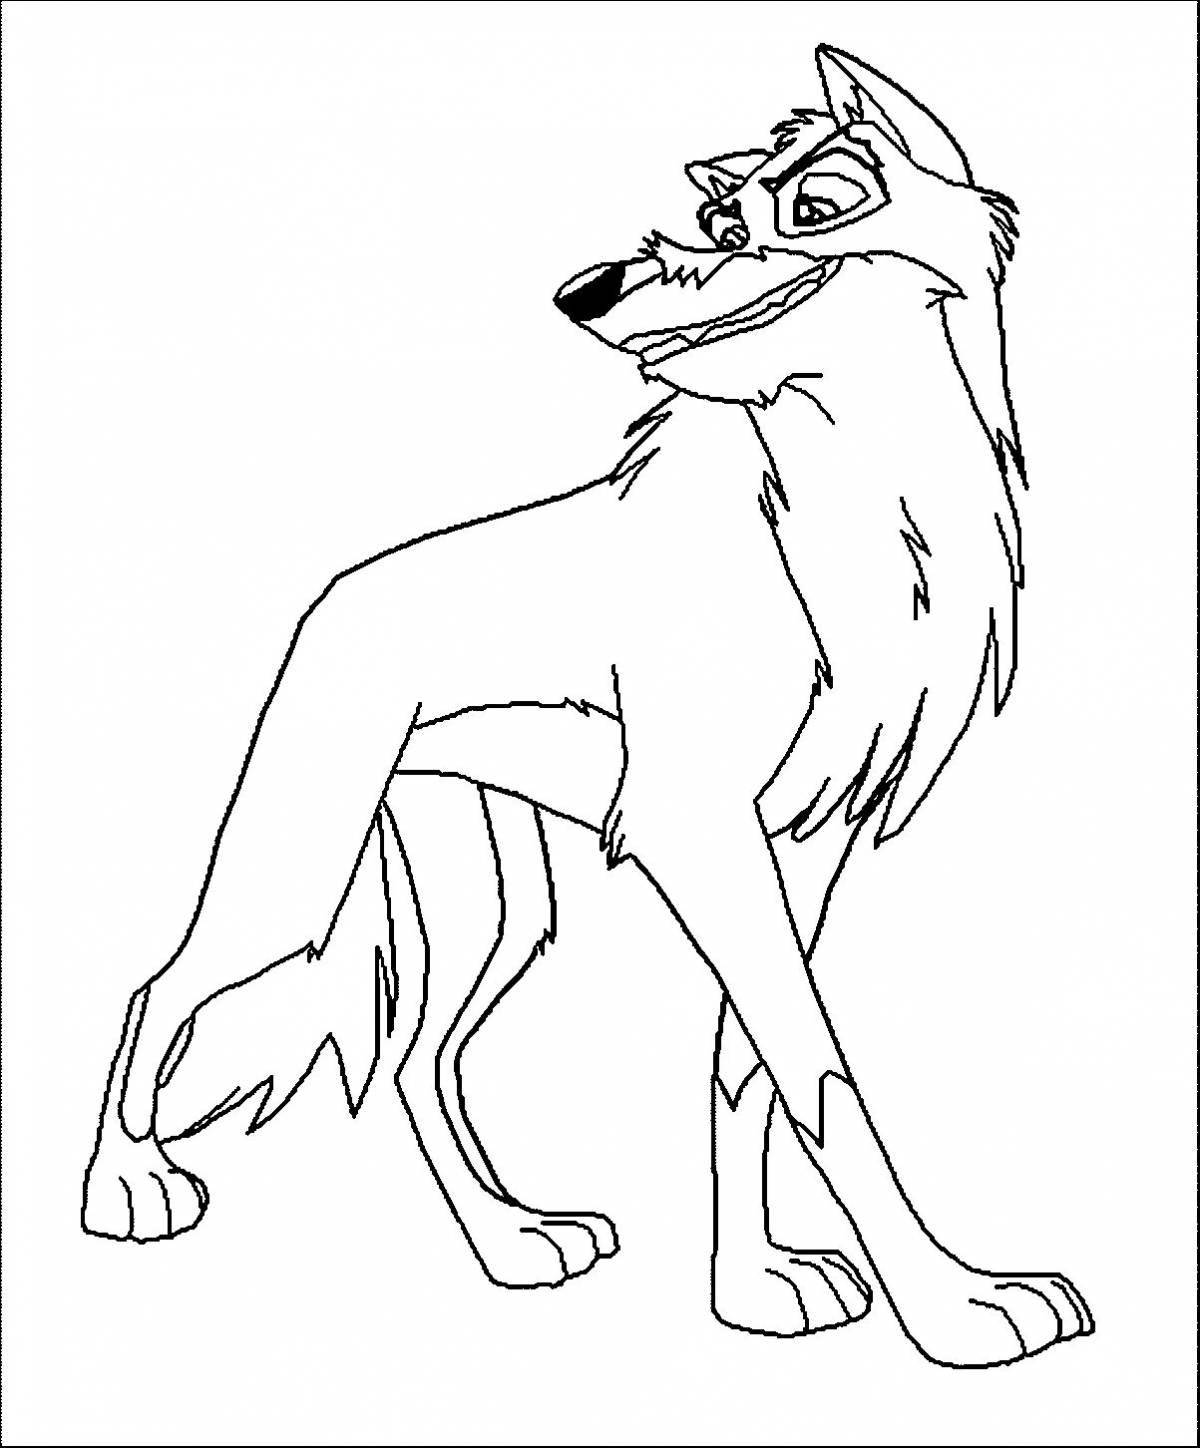 Coloring book quirky cartoon wolf